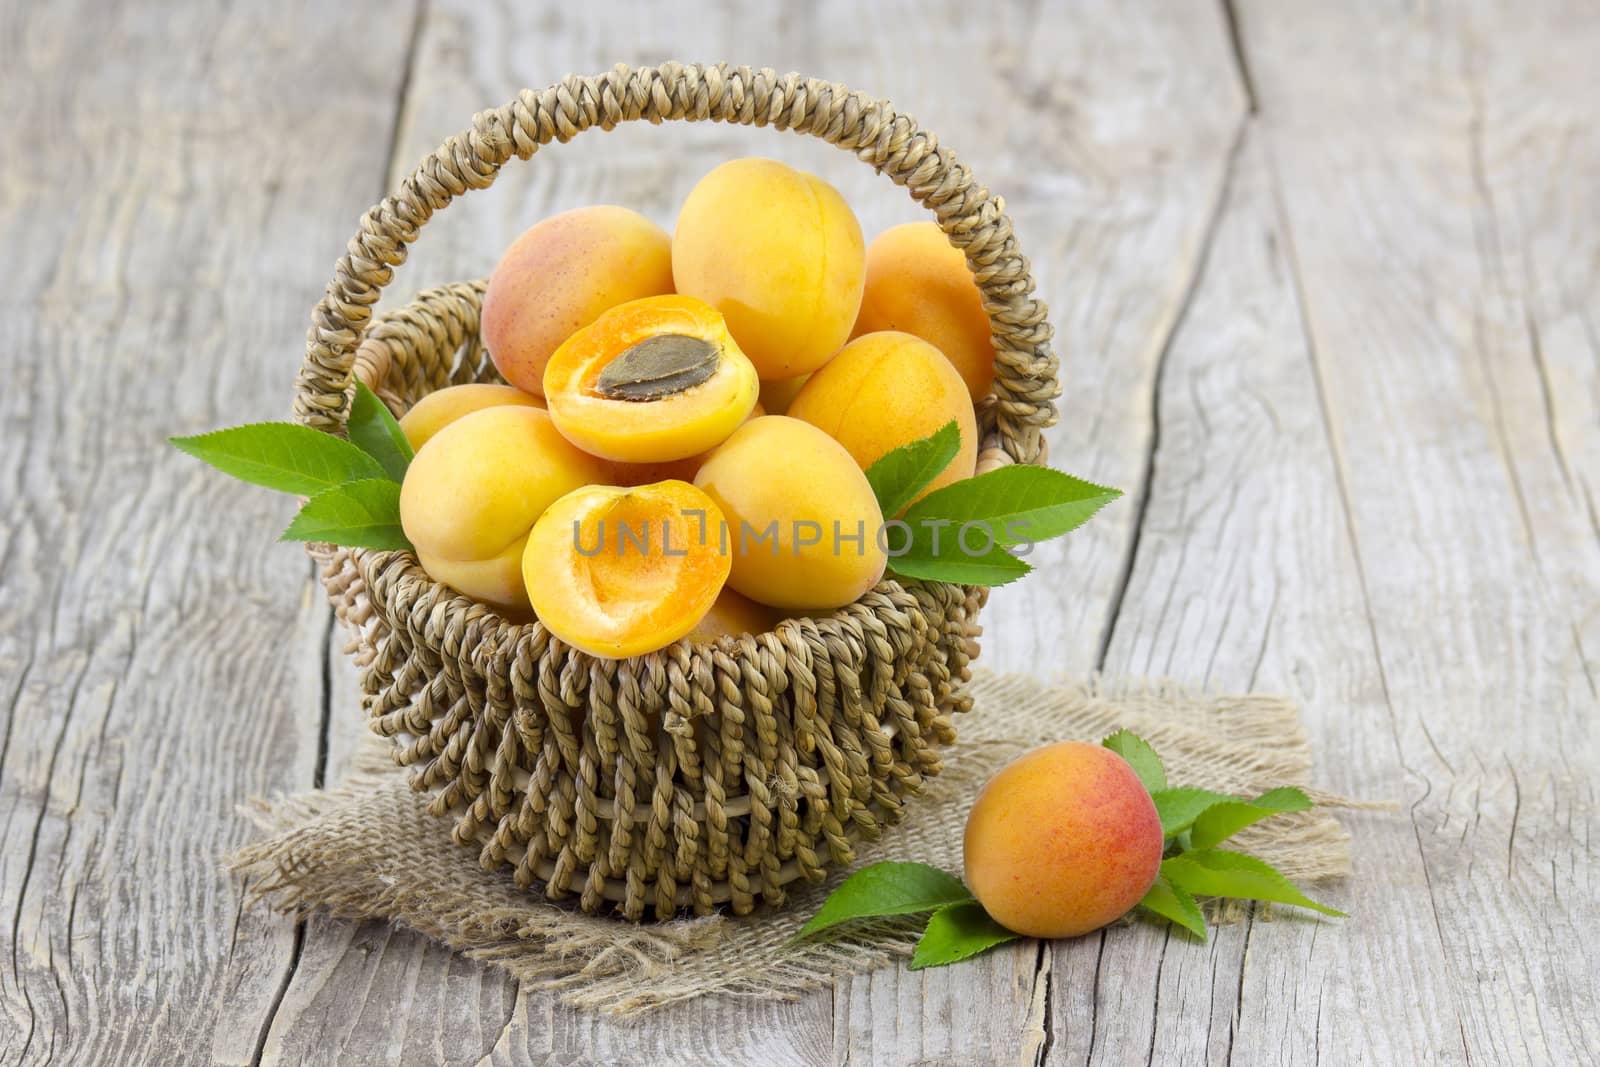 fresh apricots in a basket on wooden background by miradrozdowski